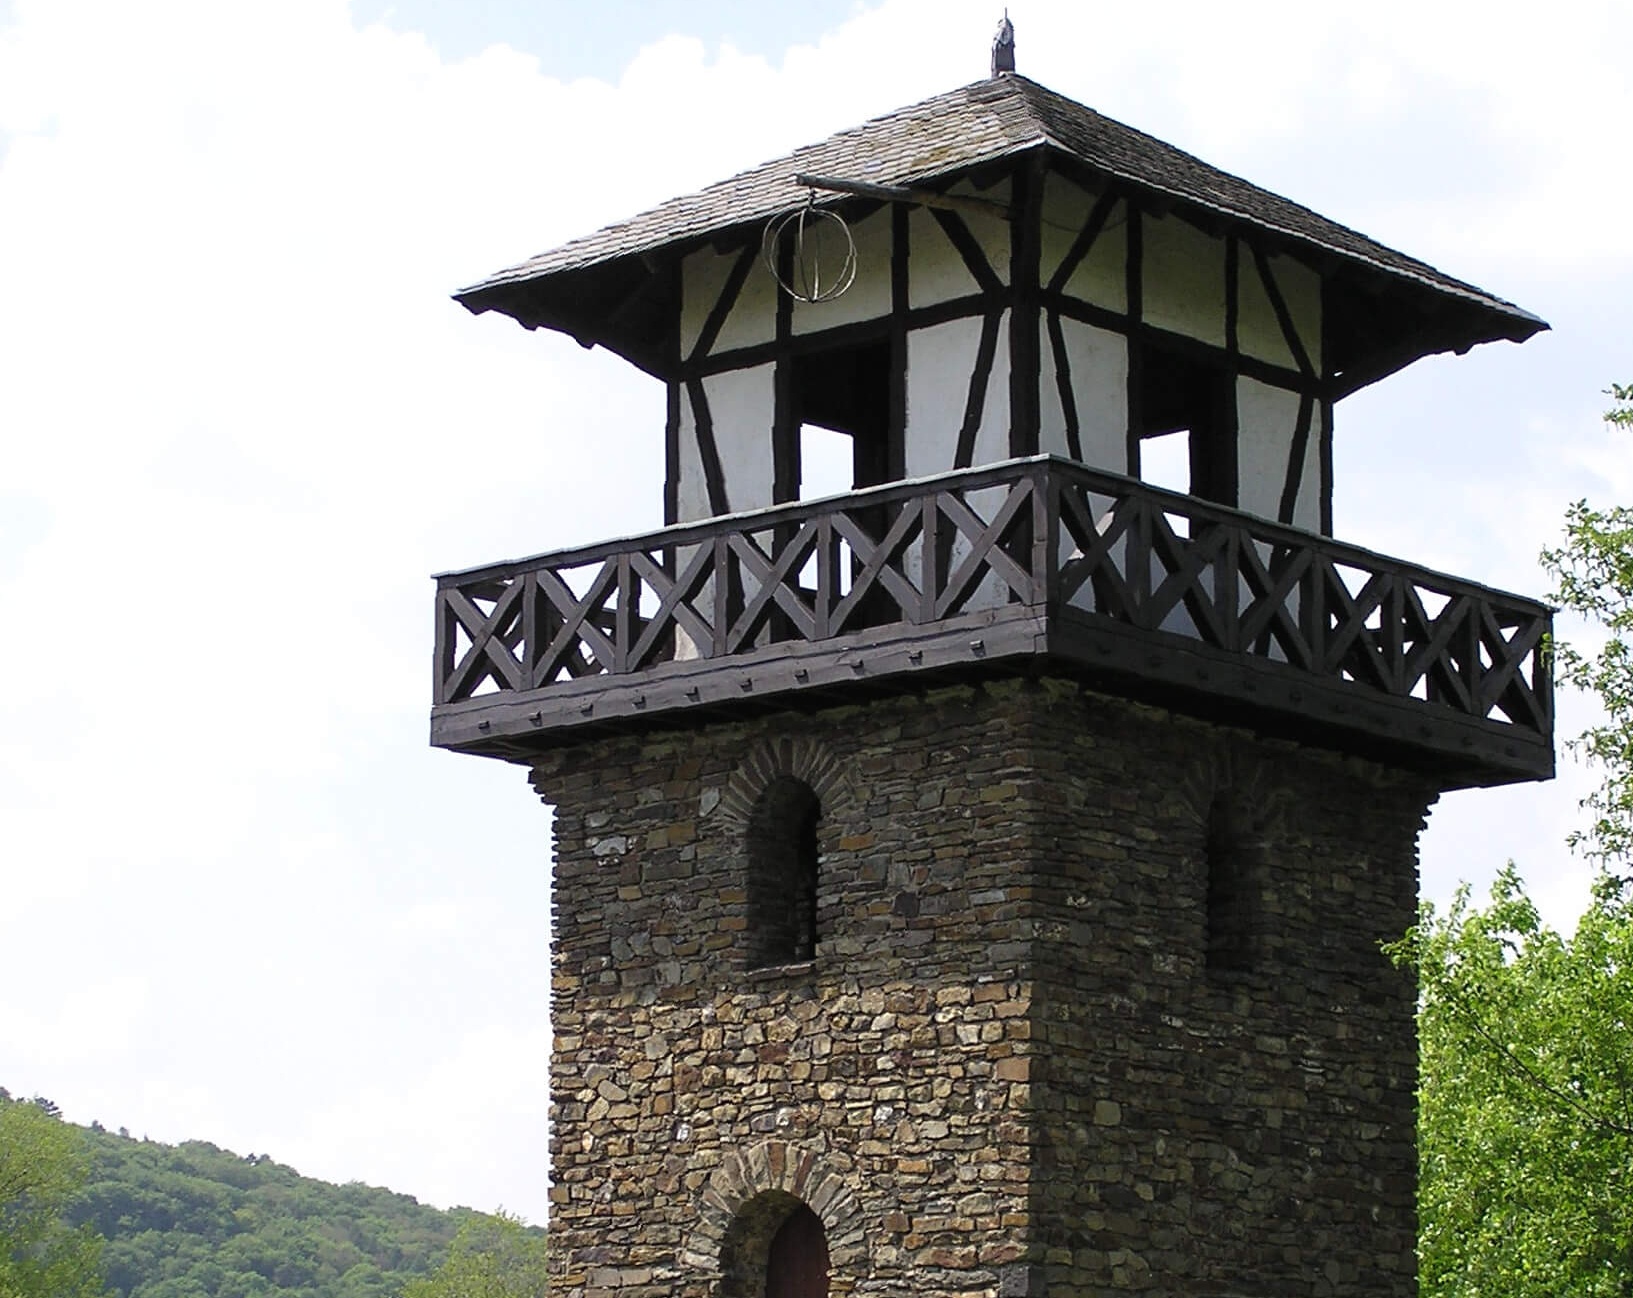 A photo of the historically incorrectly reconstructed Roman Limes watchtower near Rheinbrohl